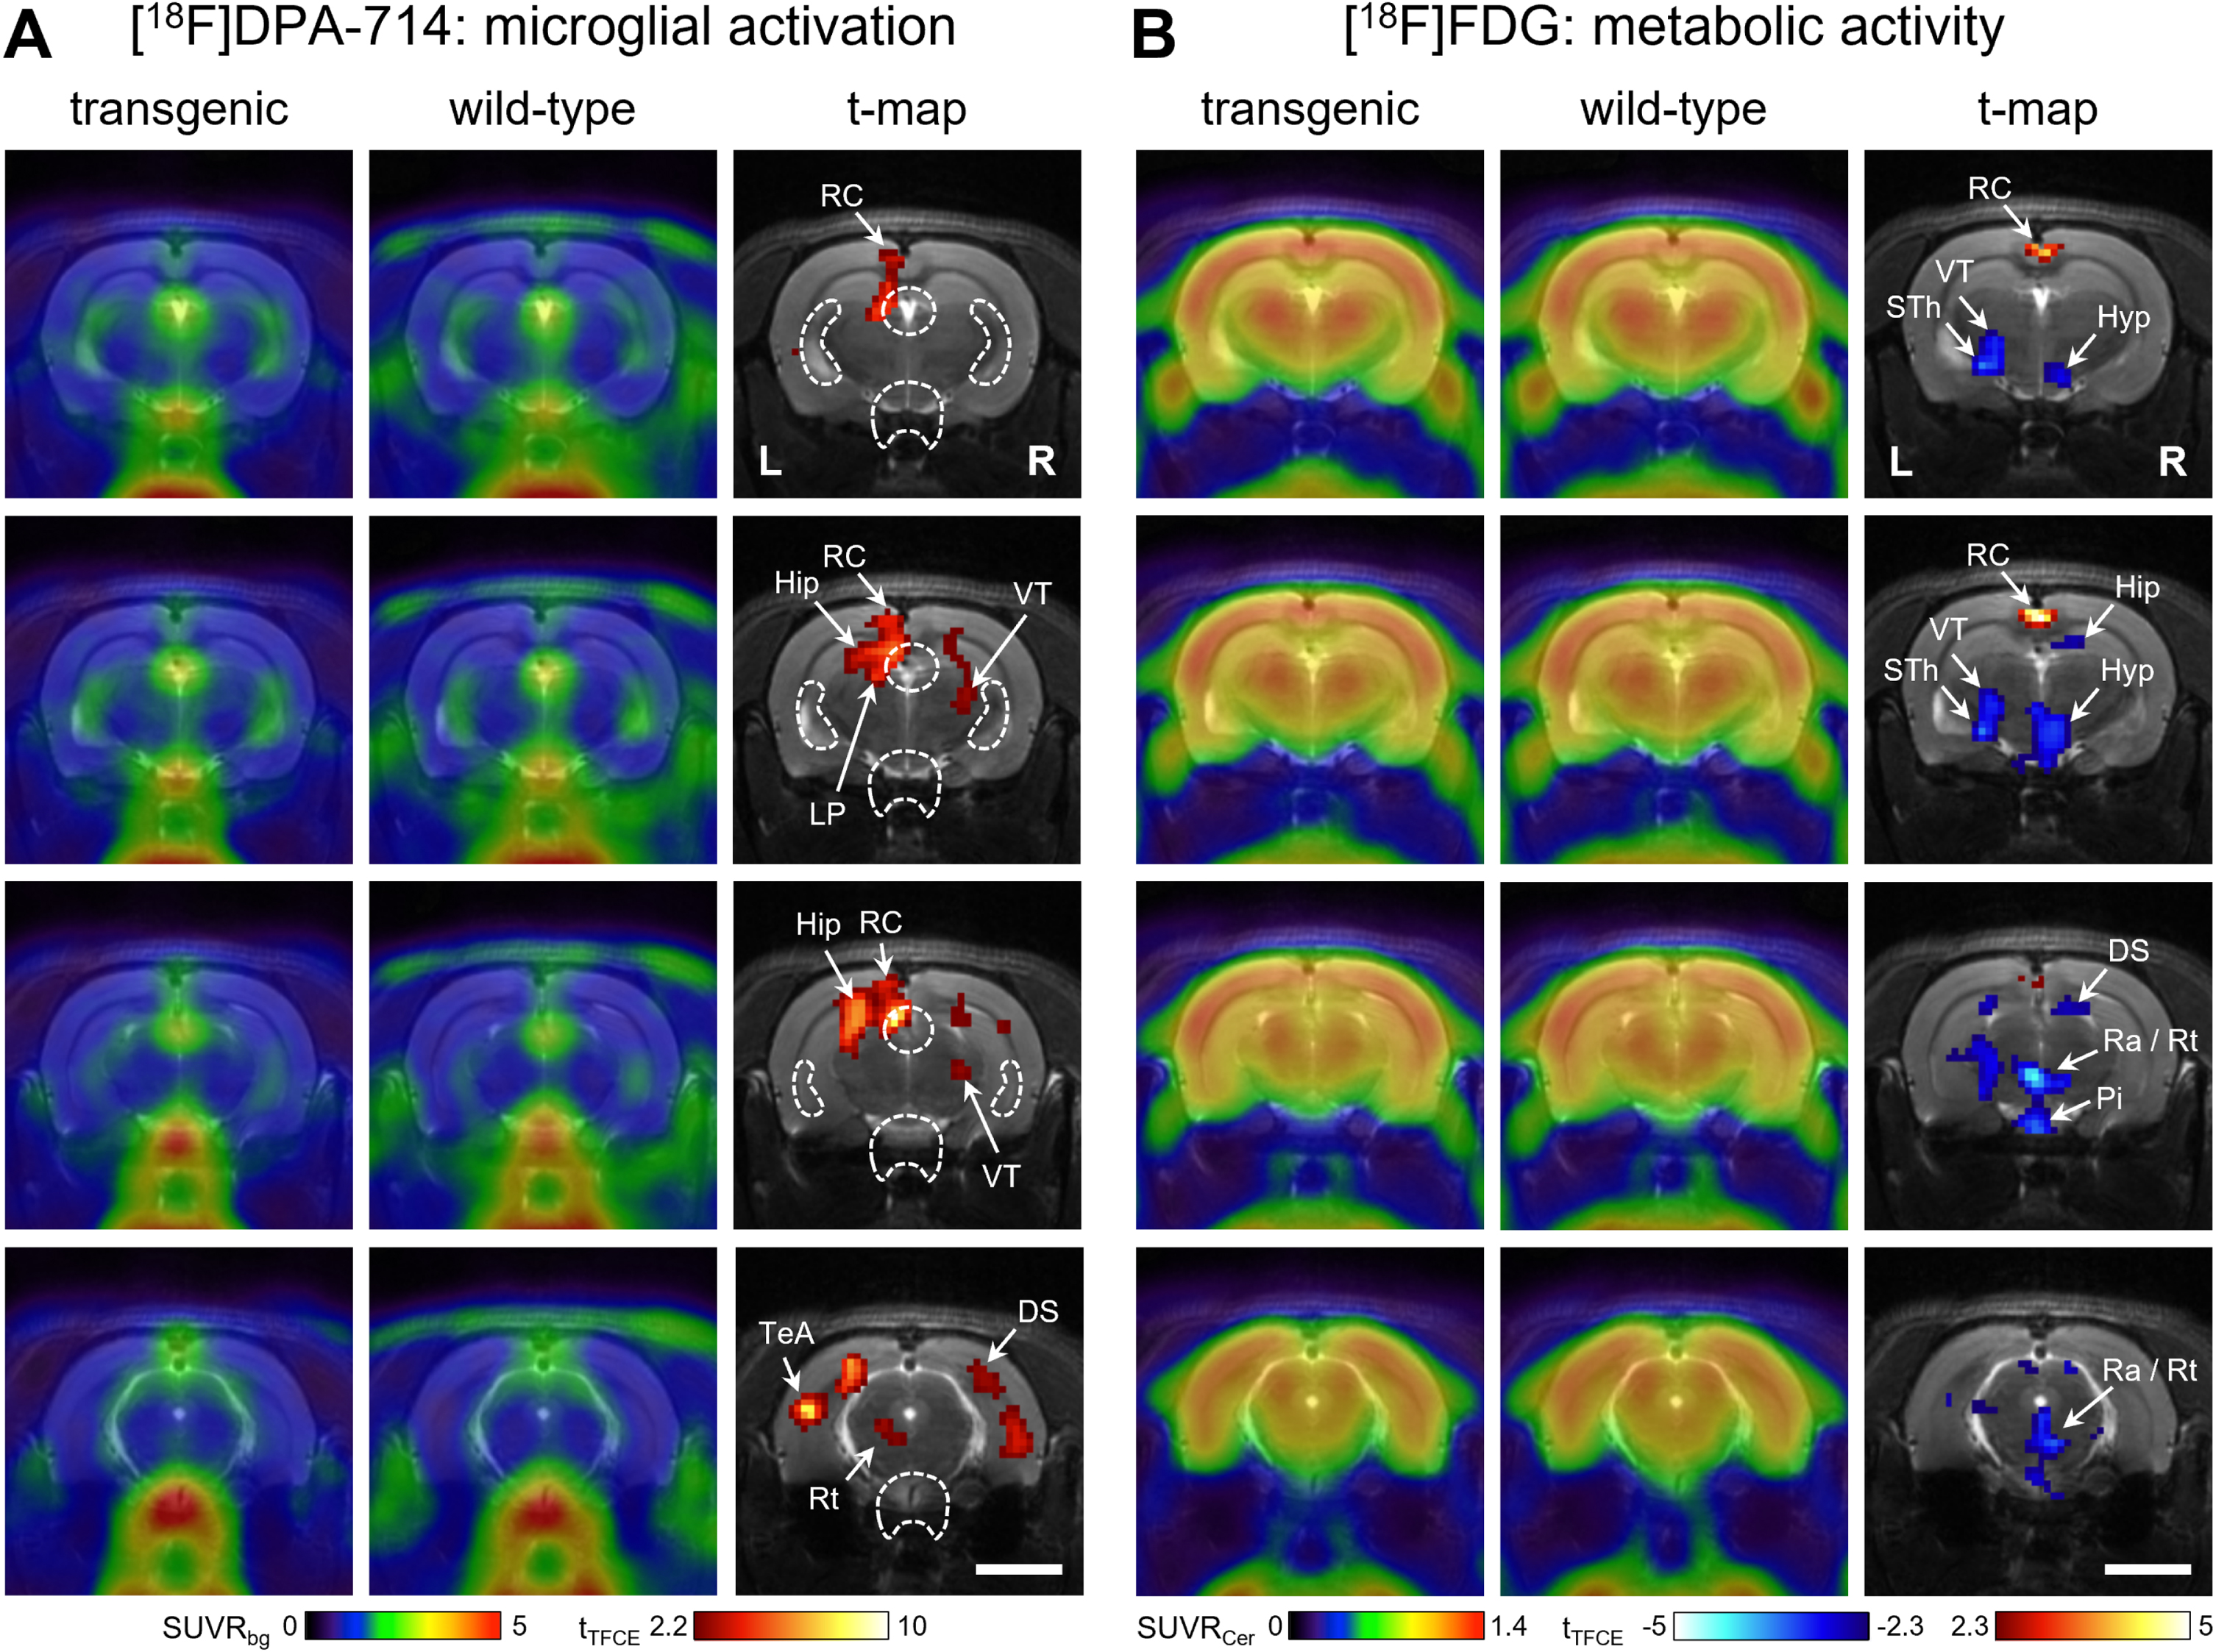 
PET imaging. Shown are averaged PET images of (A) microglial activation measured with [18F]DPA-714 (6 transgenic and 6 wild-type rats) and (B) glucose metabolism measured with [18F]FDG (5 transgenic and 6 wild-type rats). Respective t-maps show significant differences (corrected for multiple testing) between groups. Red voxels: higher tracer uptake in transgenic rats. Blue voxels: higher tracer uptake in wild-type rats. White dashed lines in A indicate regions obscured by spillover from the ventricular system and pituitary gland, where natural TSPO expression leads to high tracer binding. DS, dorsal subiculum; Hip, hippocampus; Hyp, hypothalamus; LP, lateral posterior thalamus; Pi, pituitary gland; Ra, raphe; RC, retrosplenial cortex; Rt, reticular formation; STh, subthalamic nucleus; TeA, temporal association cortex; VT, ventral thalamus. Scale bar: 5 mm.